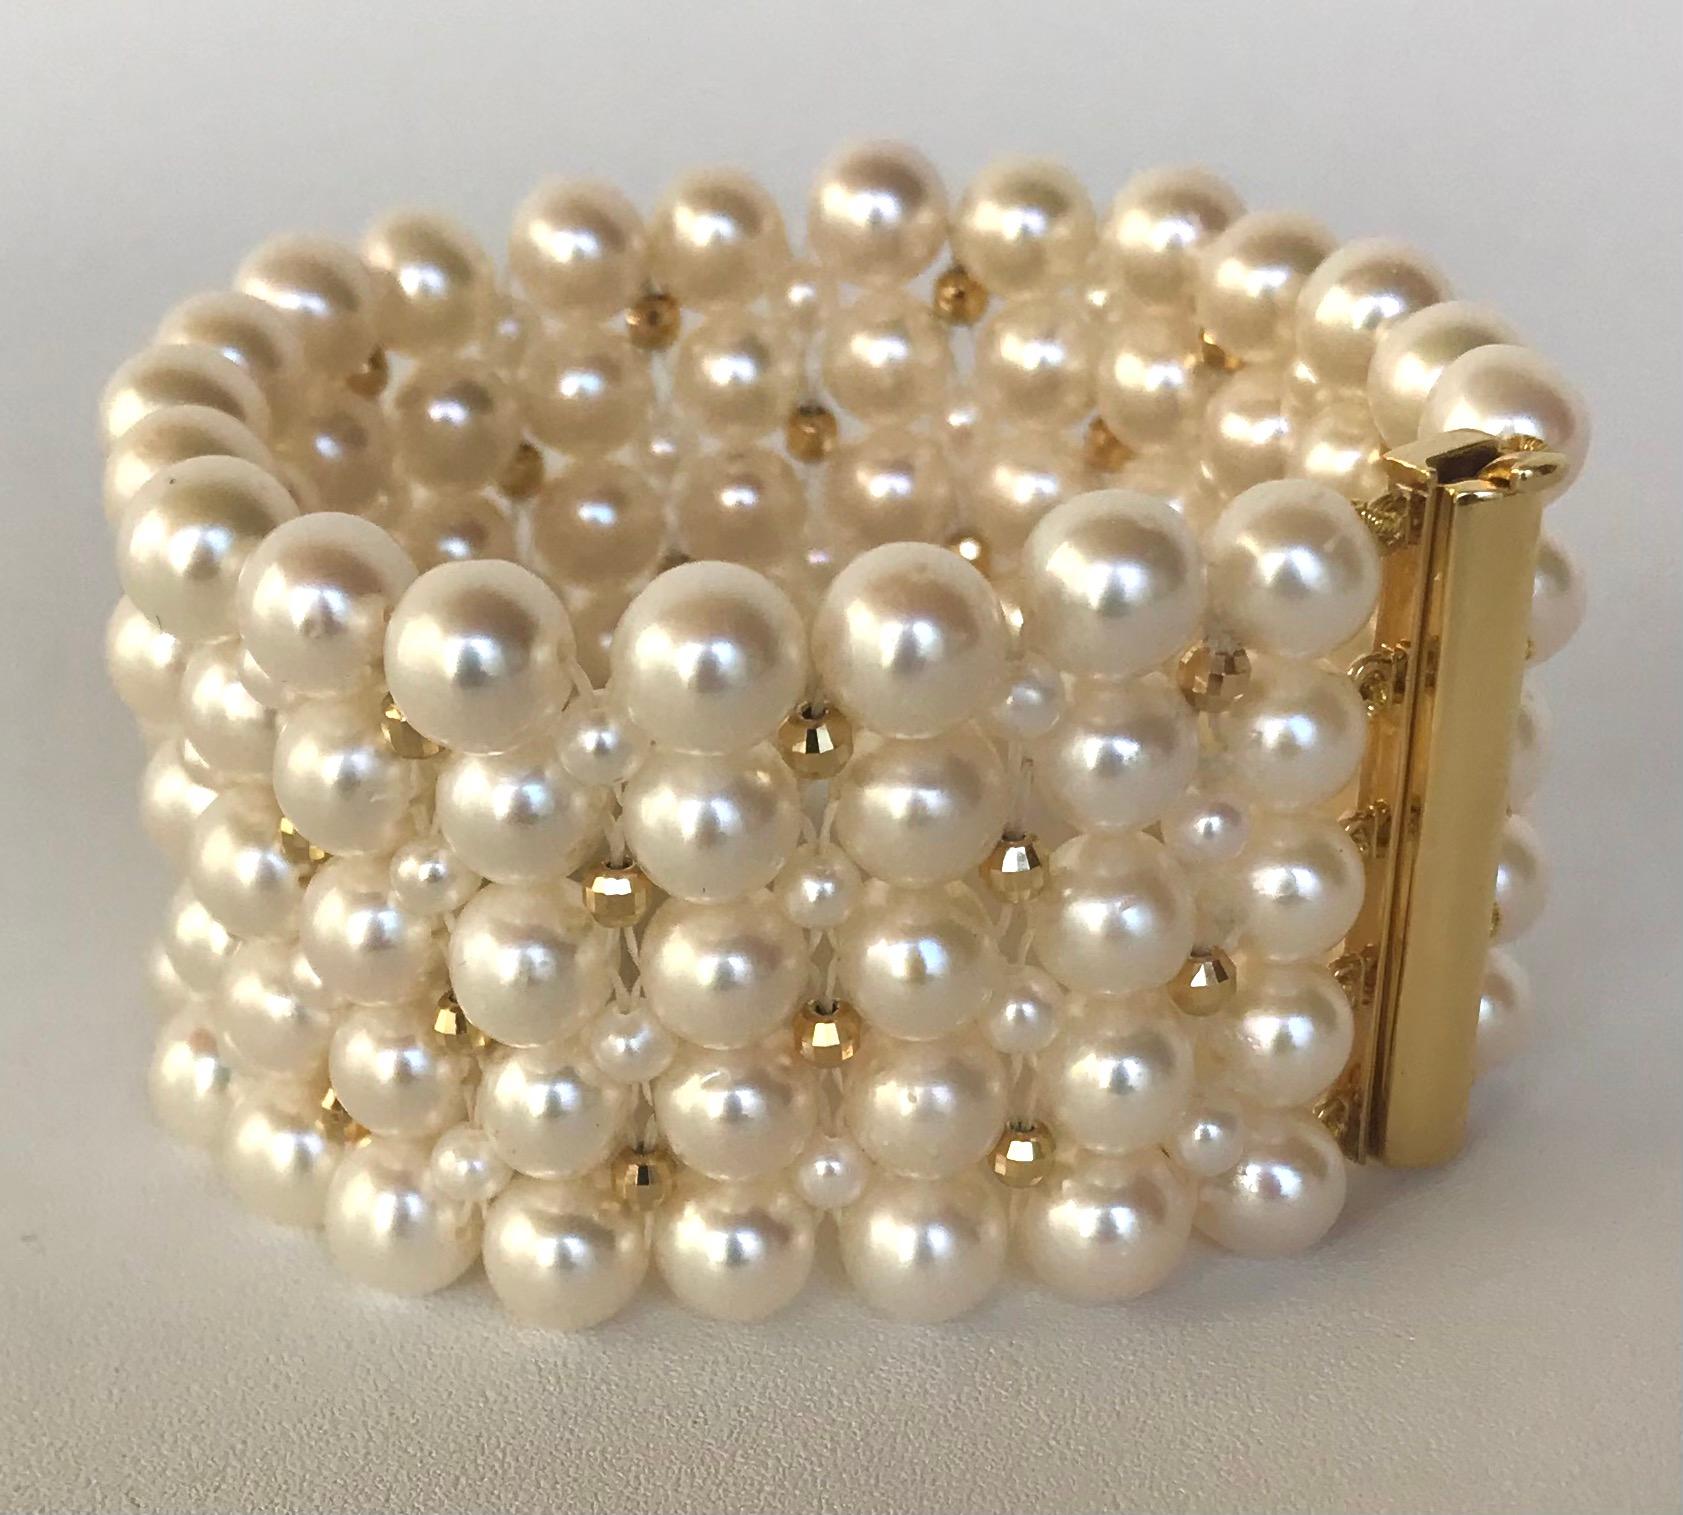 Marina J Stunning Woven Pearl Bracelet with 14 Karat Yellow Gold Beads and Clasp In New Condition For Sale In Los Angeles, CA